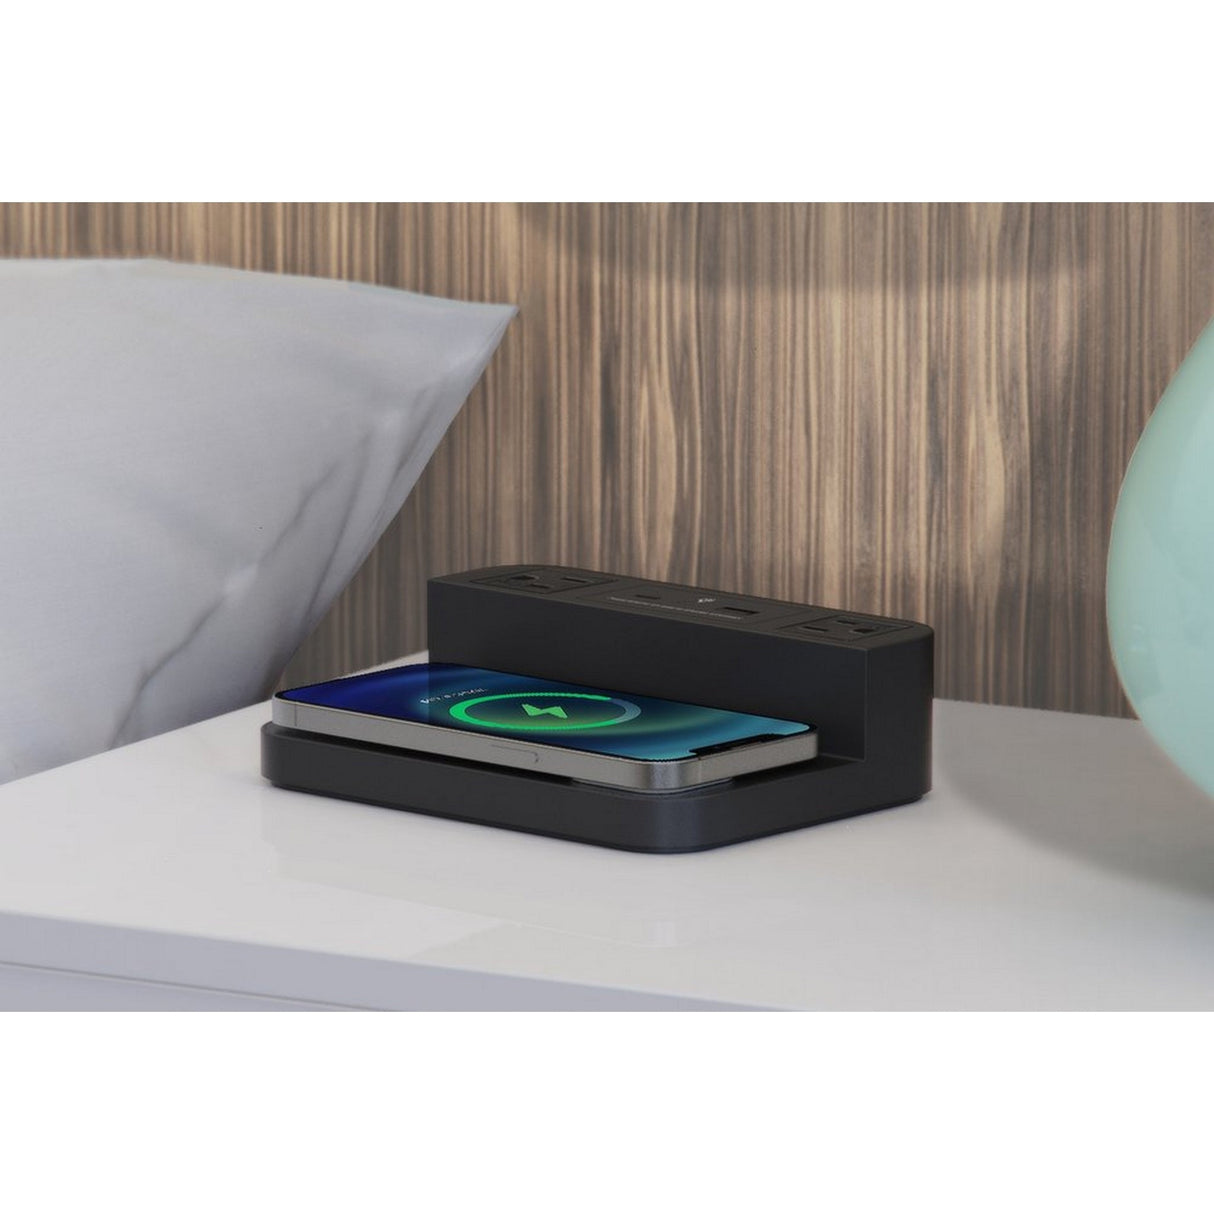 Nonstop Station P Universal USB/USB-C and Wireless Hotel Smartphone Charging Station